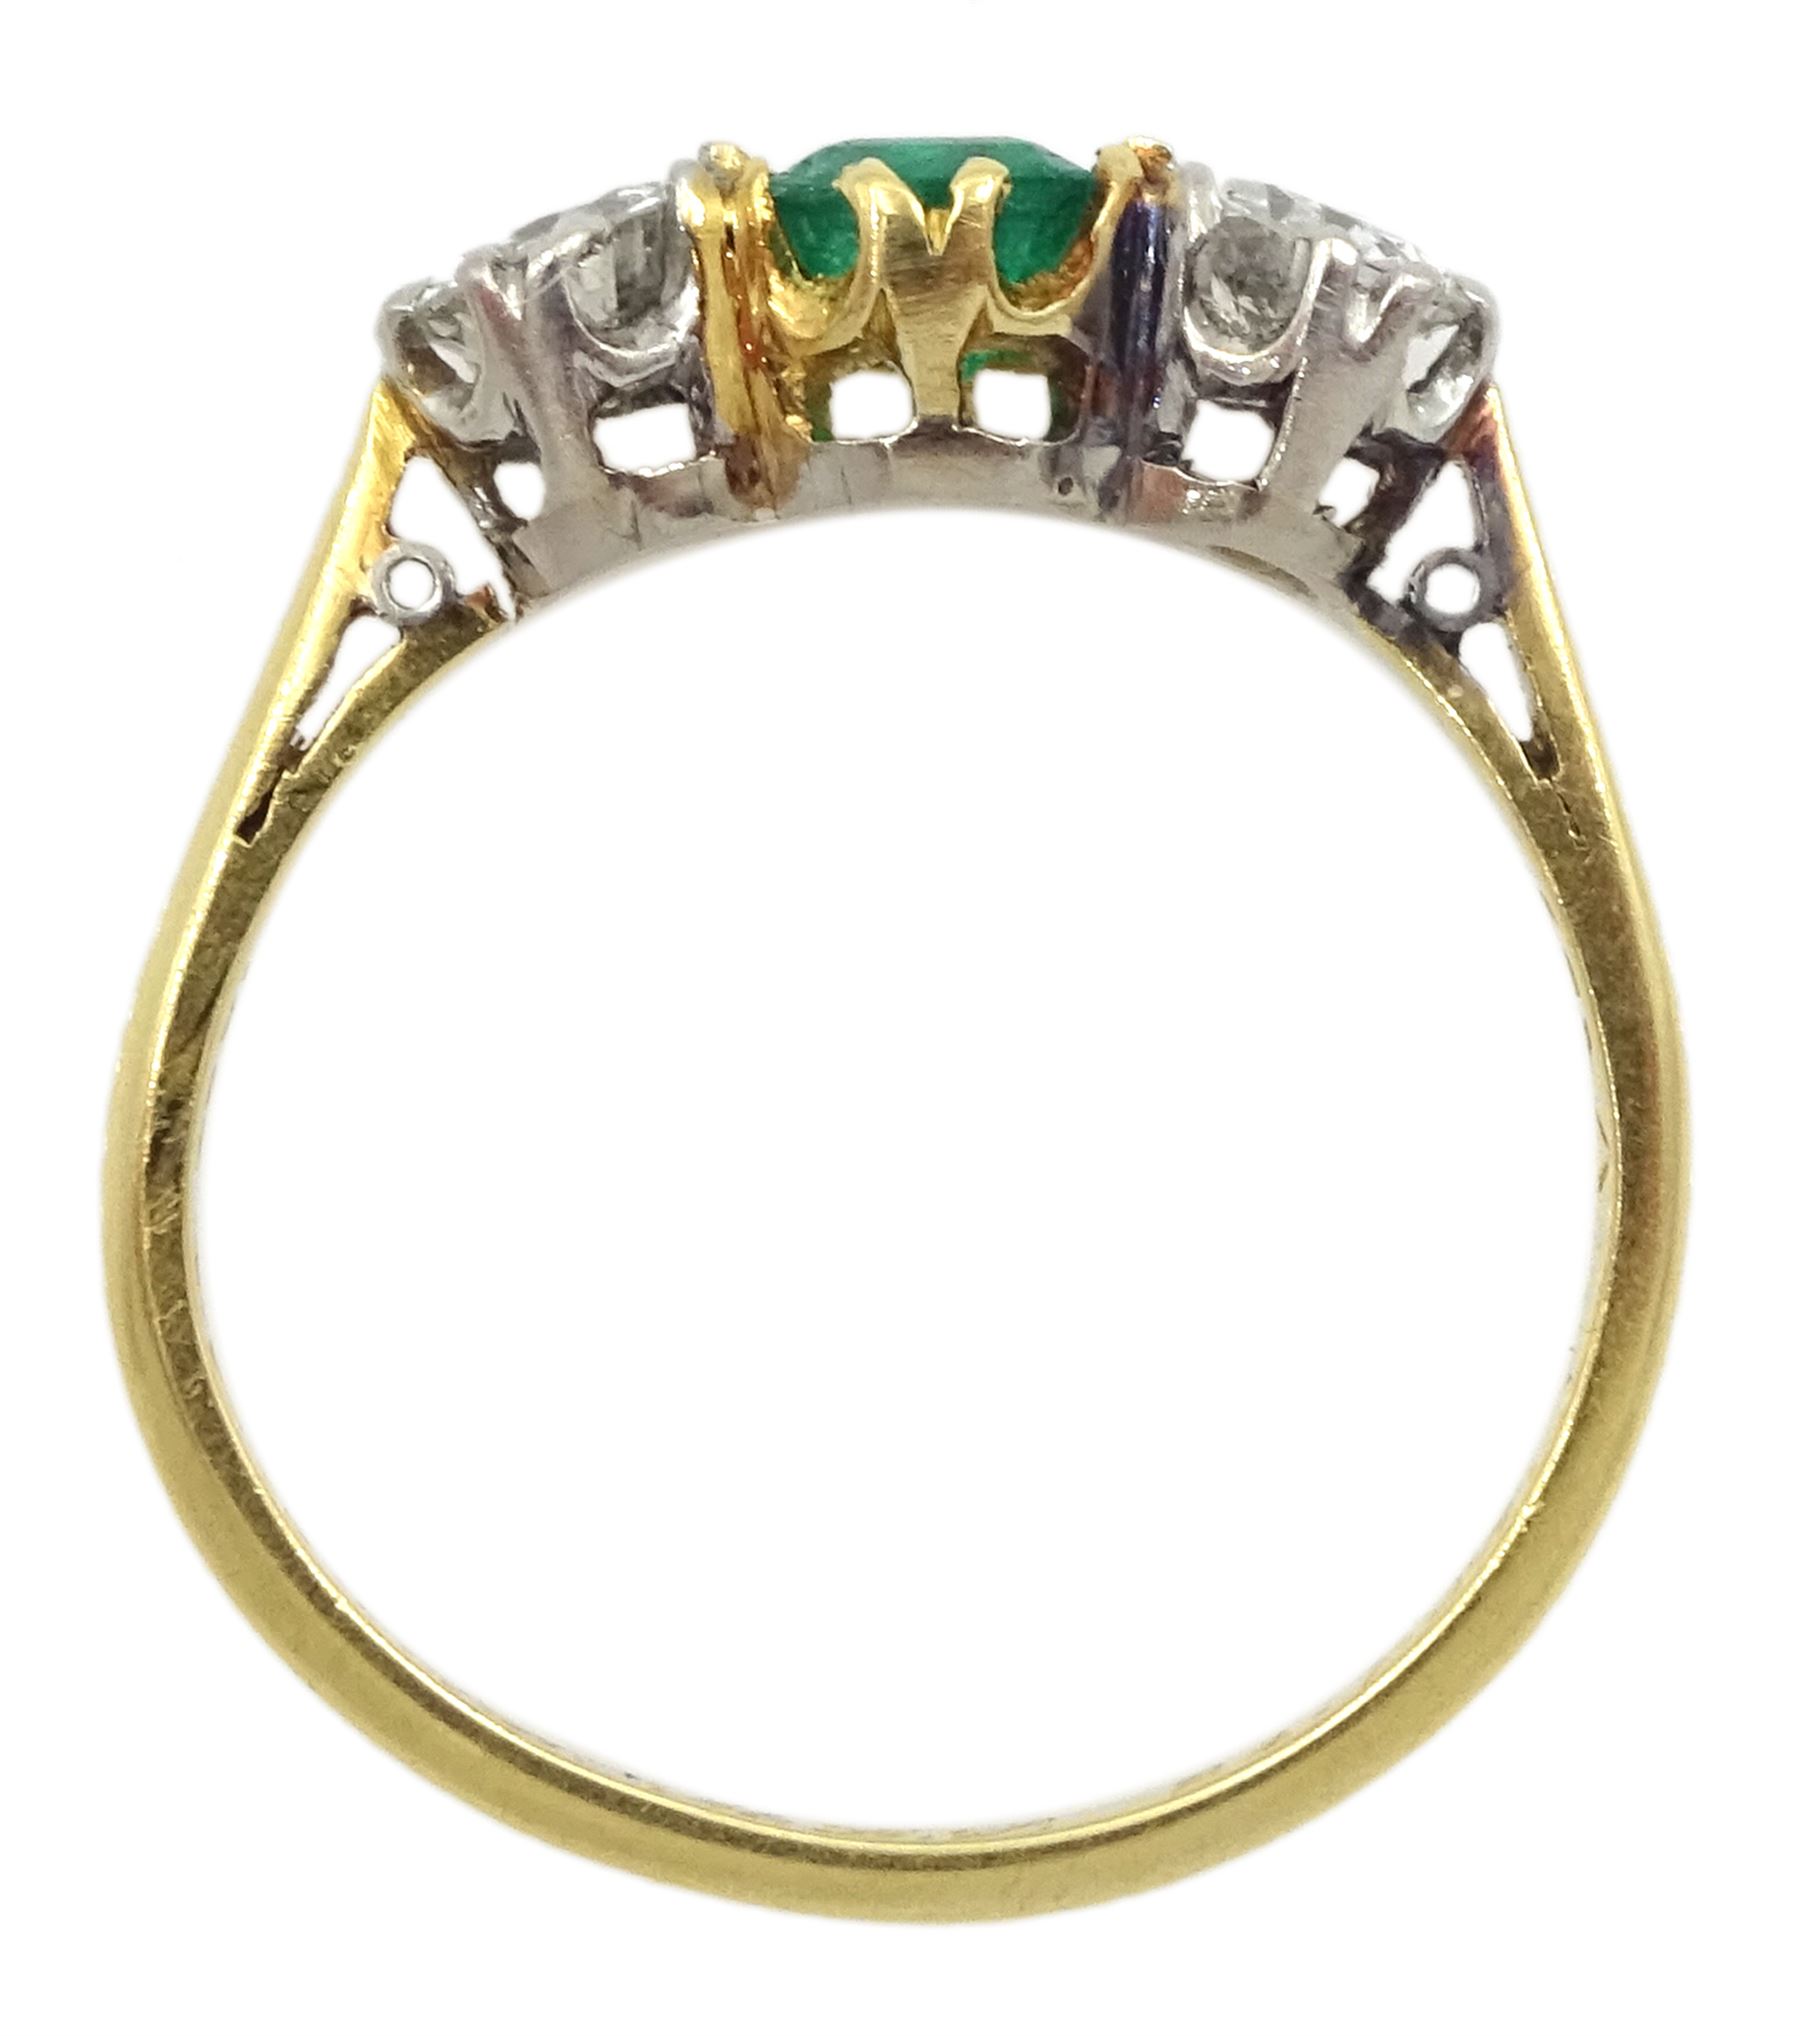 Early 20th century gold three stone old cut diamond and emerald ring - Image 6 of 7